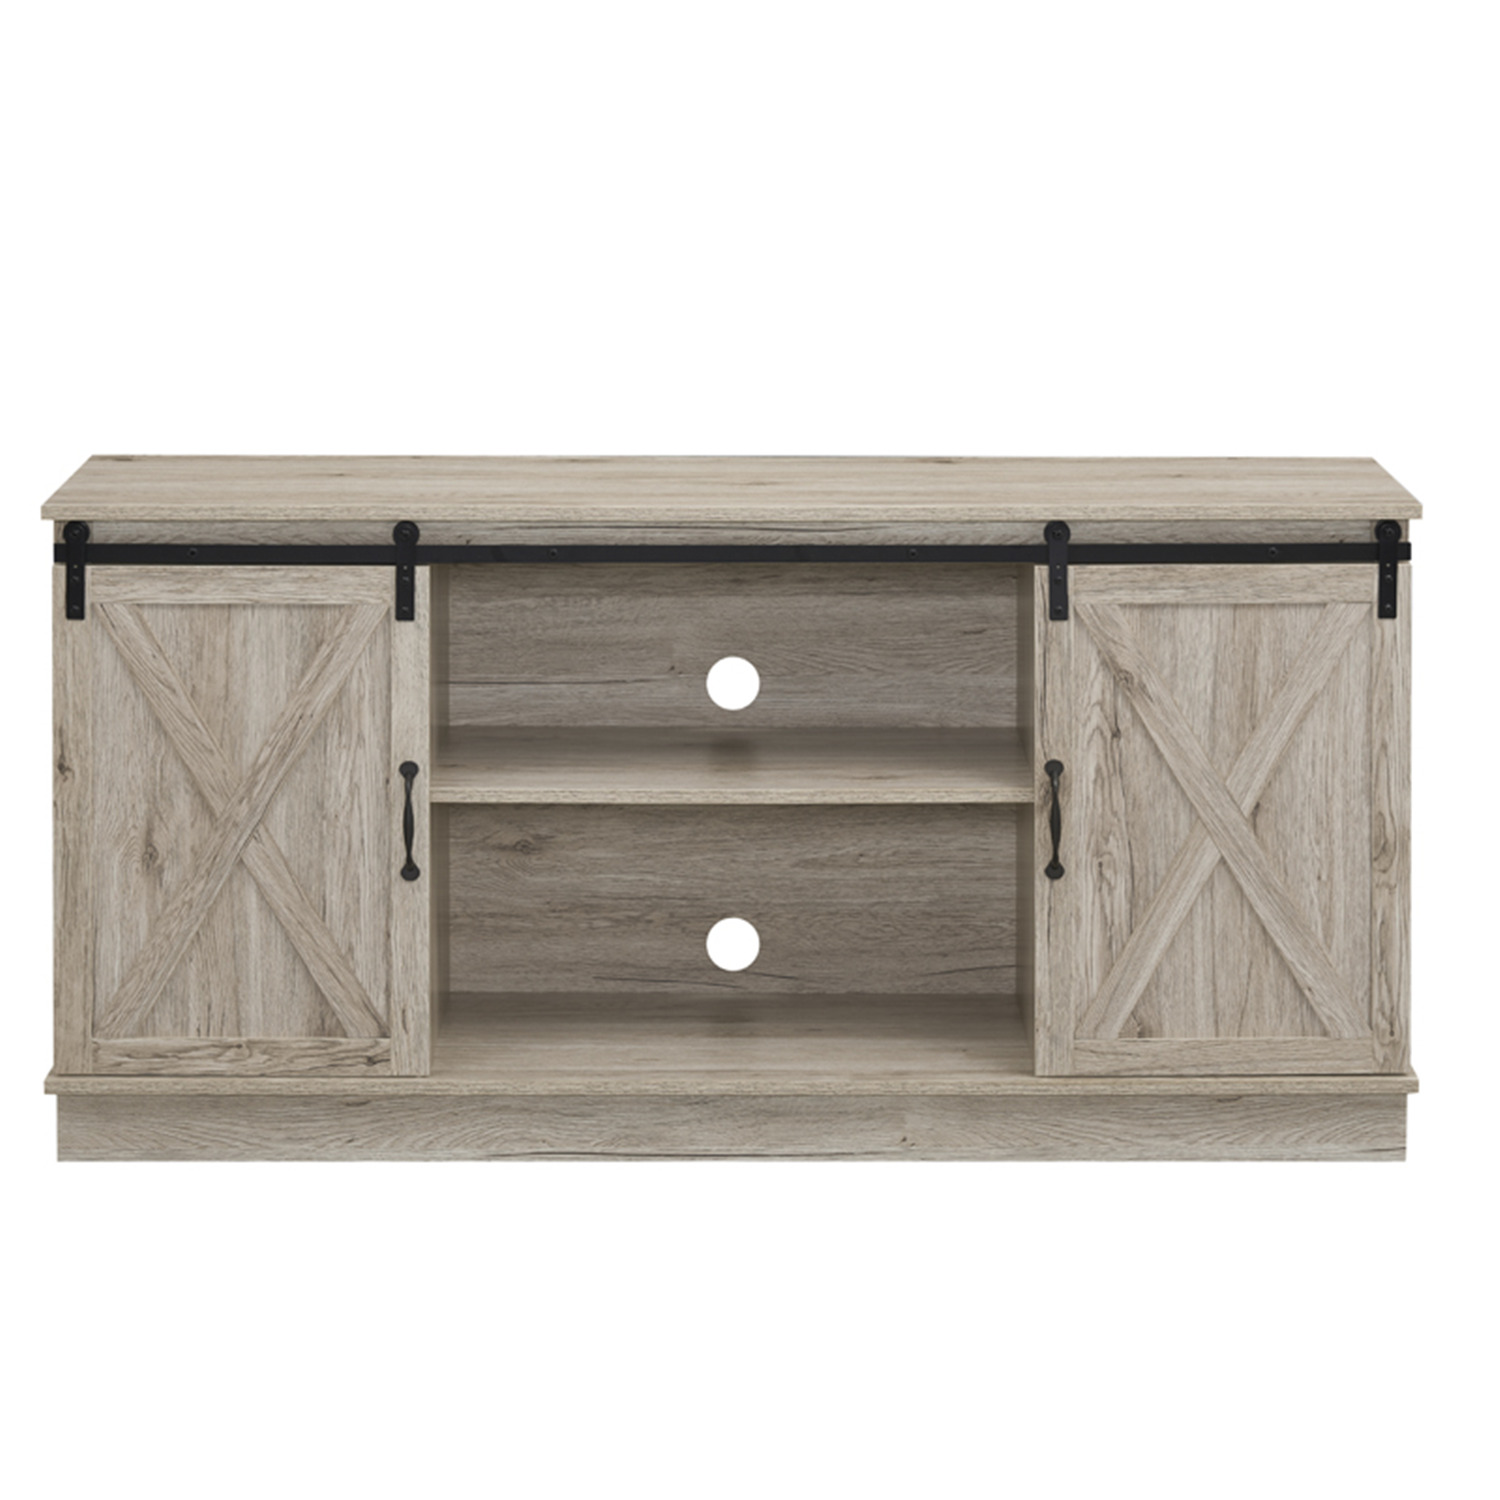 Naomi Home Rylee Farmhouse Style 60" TV Console Cabinet With Sliding Barn Doors